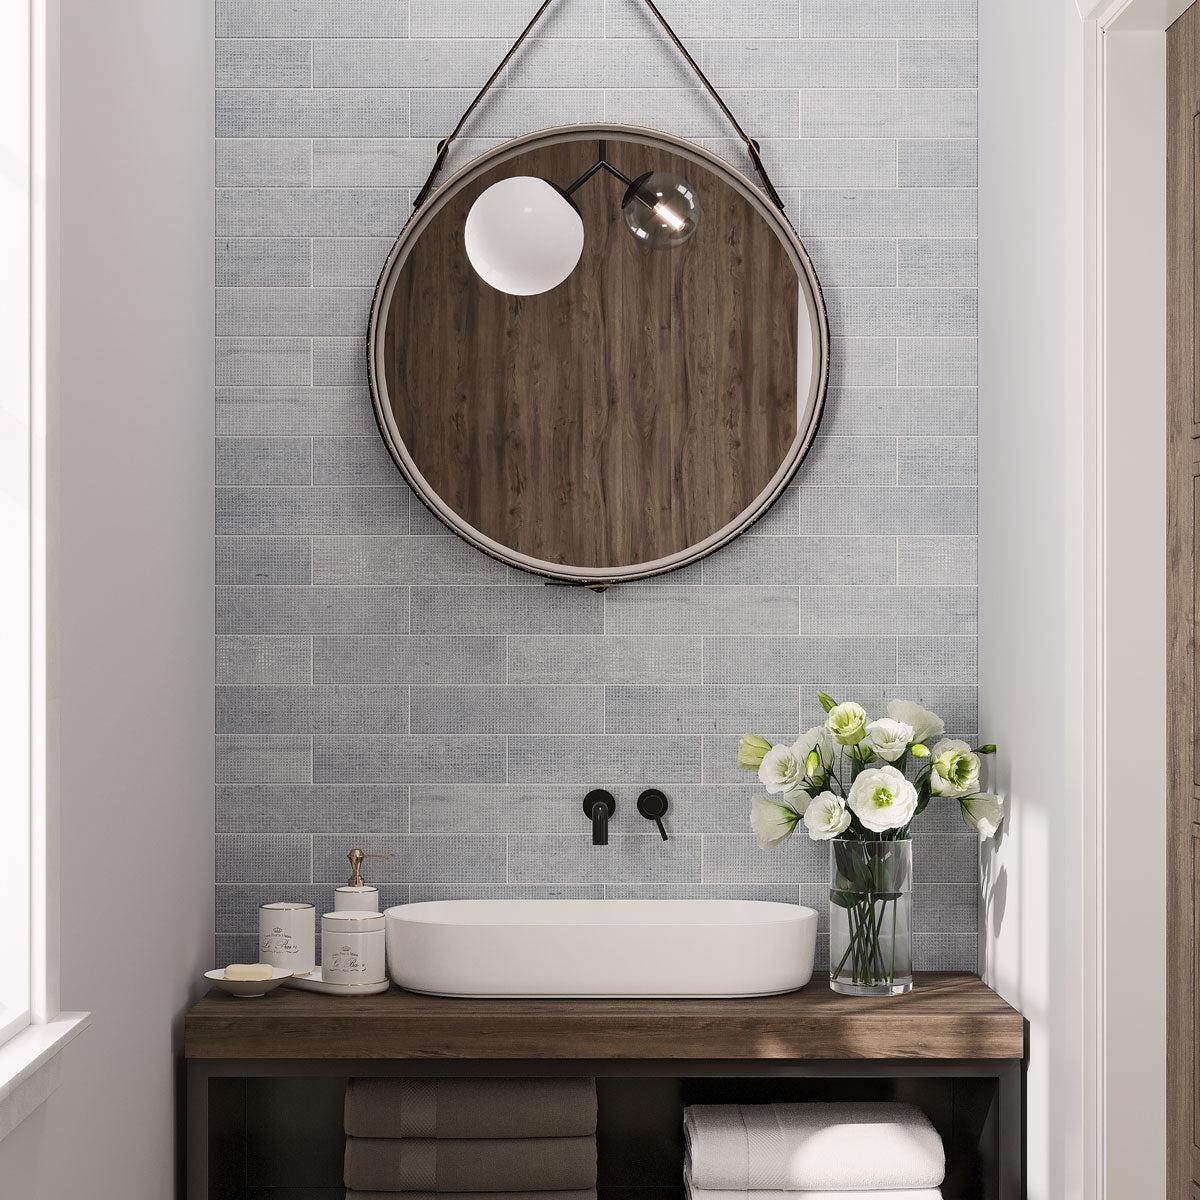 Cozy half bathroom design with wood accents and marble subway tiles